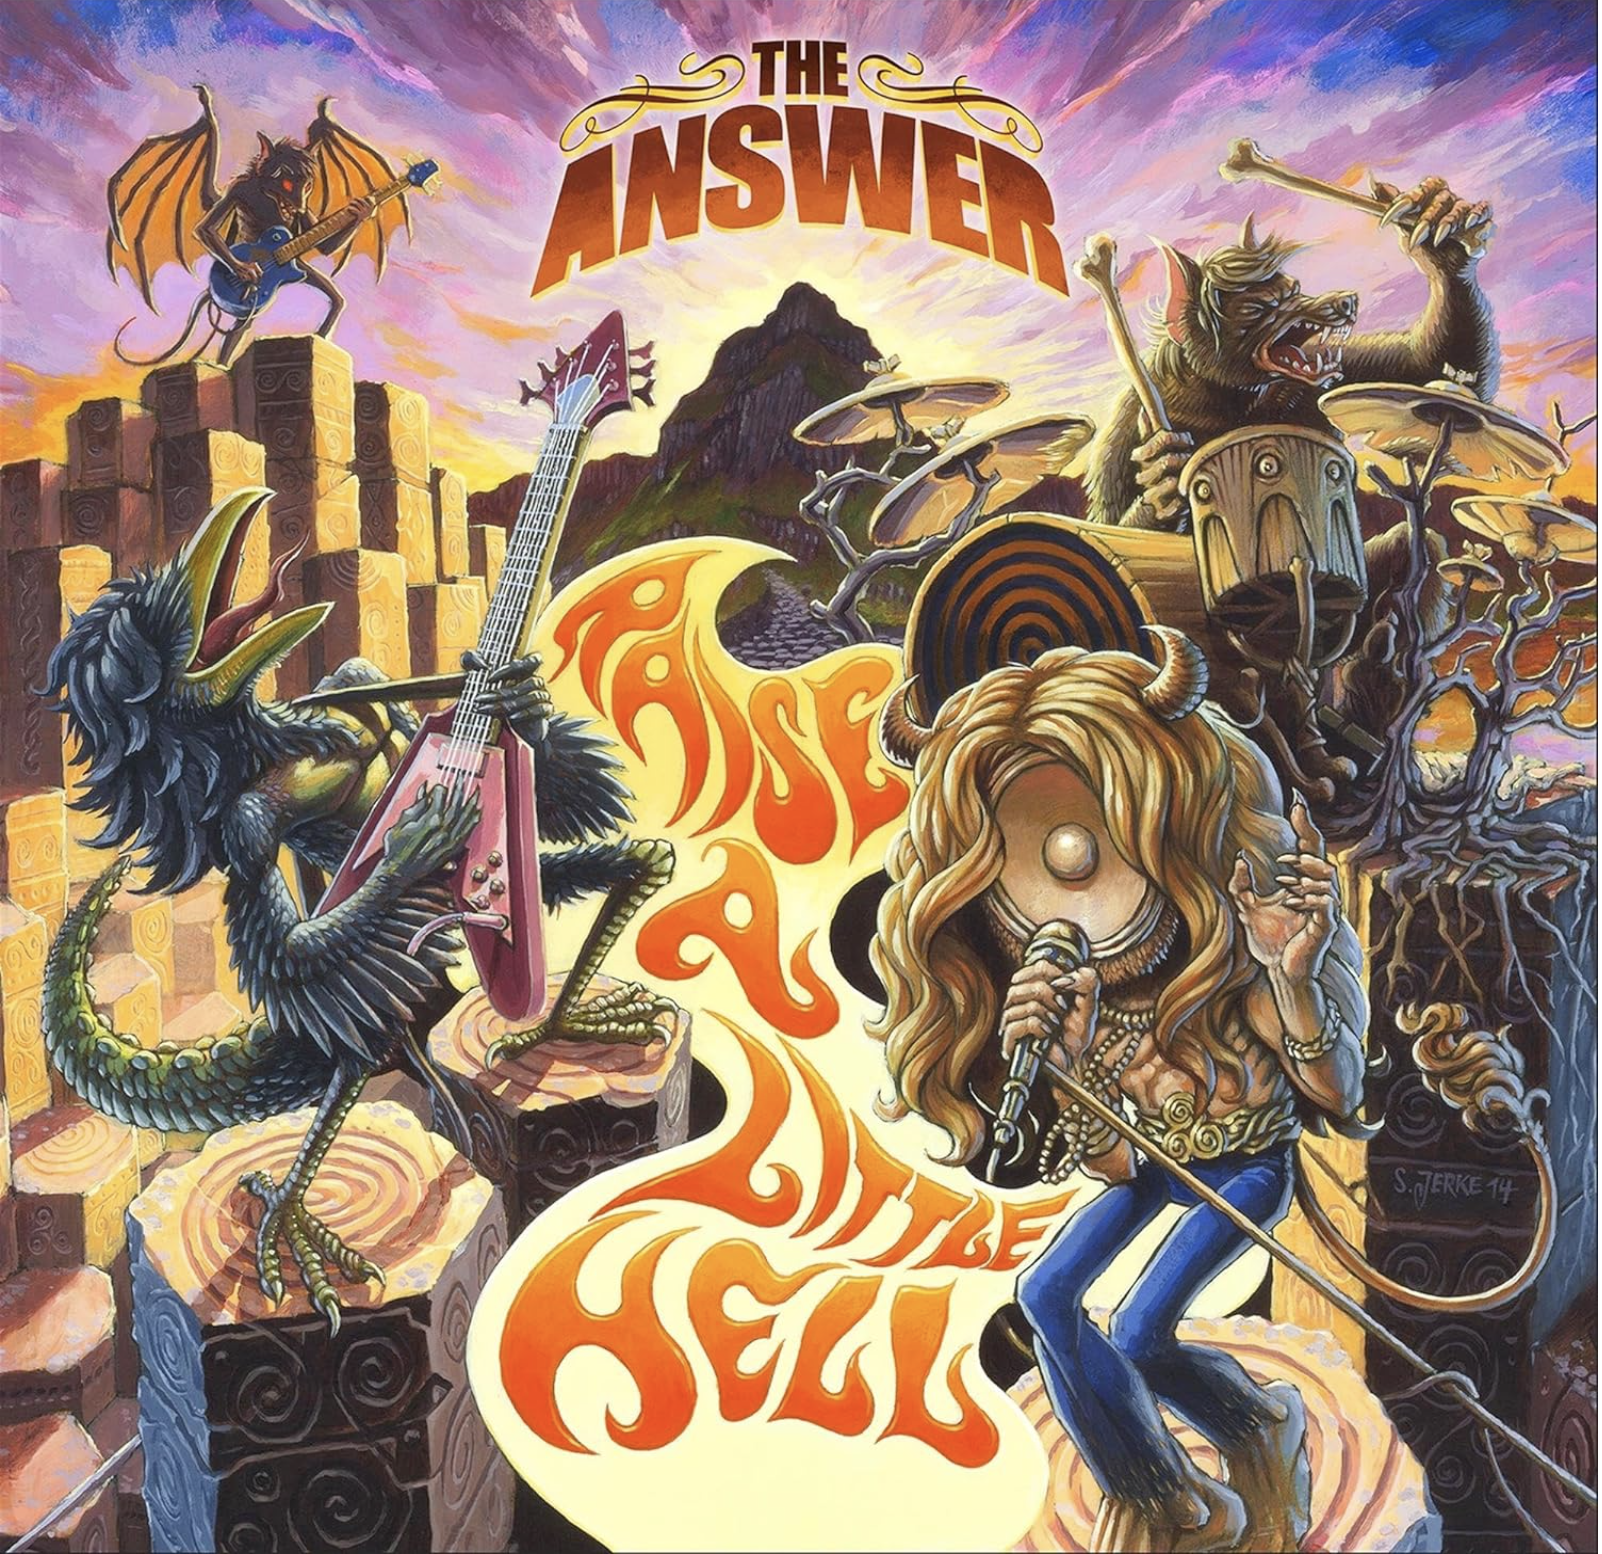 Archive – Album review: The Answer – Raise A Little Hell